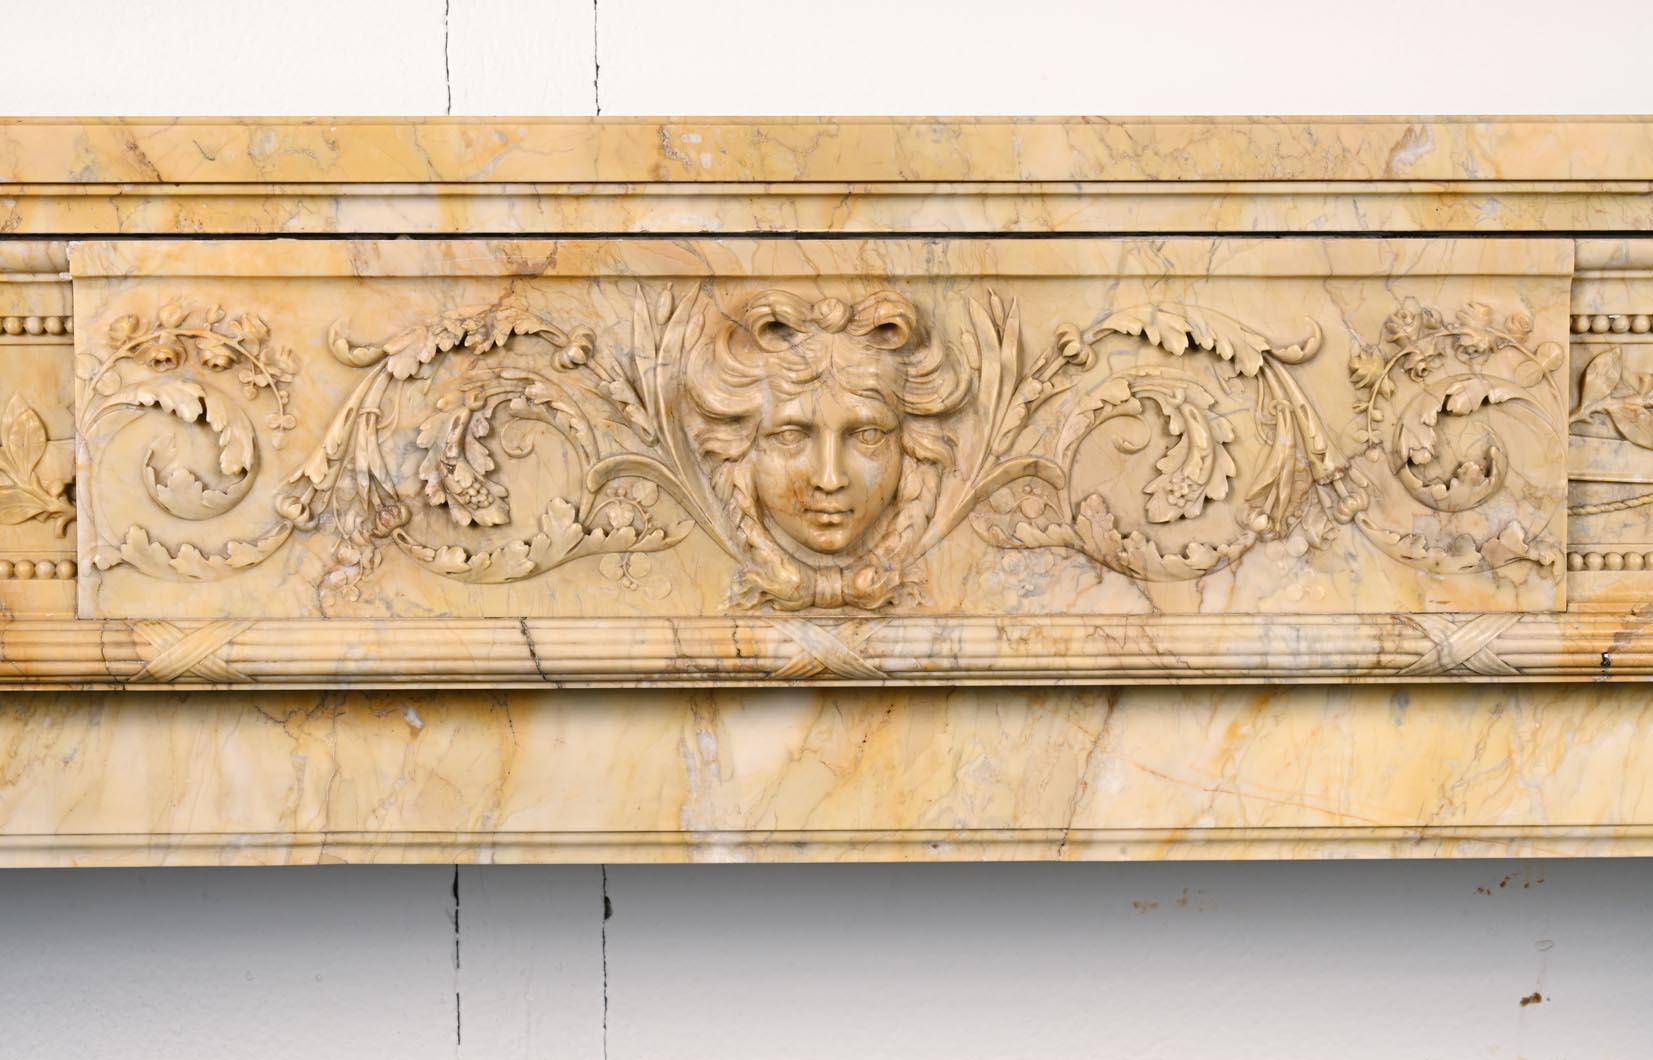 This large Louis XVI style mantelpiece was carved in Sienna yellow marble in the 19th century. The lintel is adorned with a rich and delicate low relief sculpture: in the centre, a head of Apollo with plaited hair is framed by an oval motif of reeds